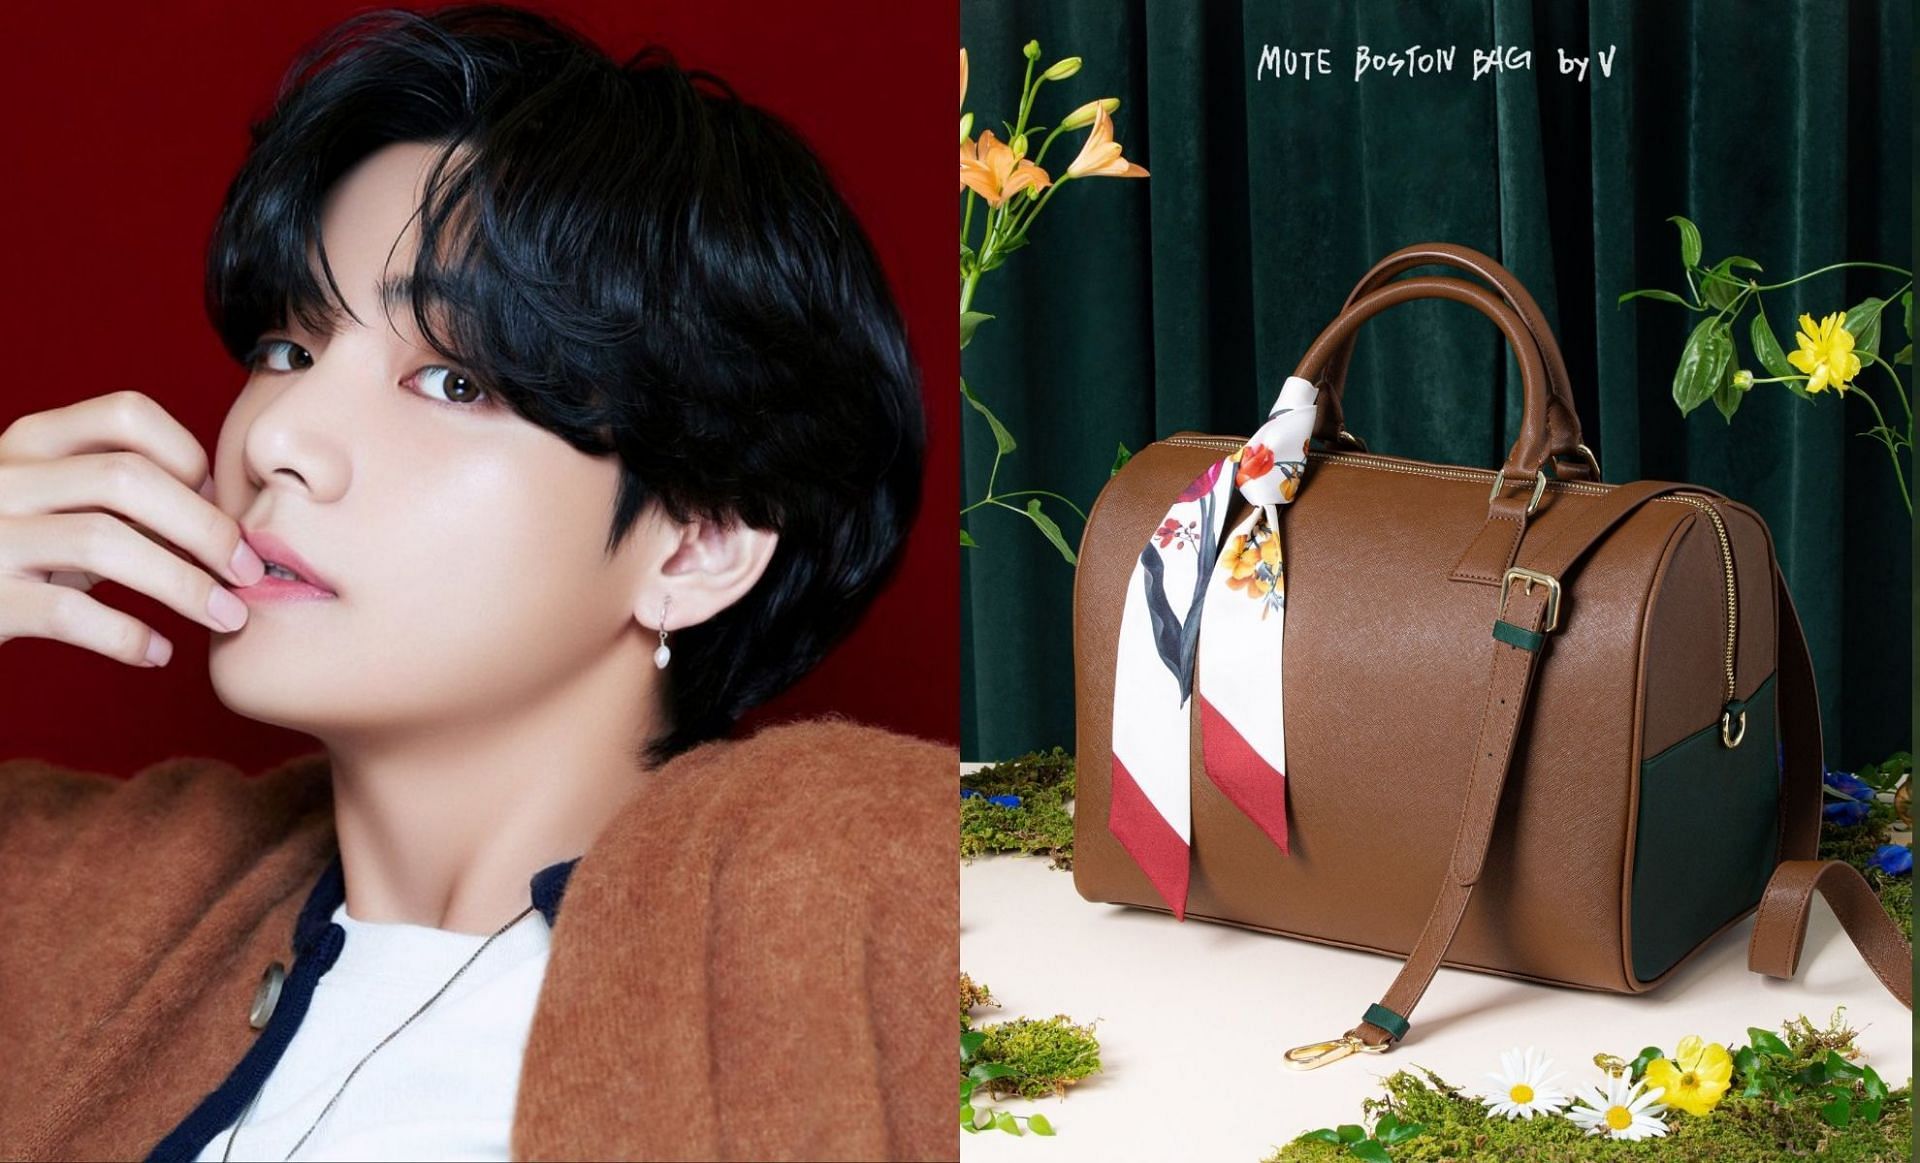 BTS V's Mute Boston Bag: Sells out in a minute, ARMYs furious with insane  reselling price